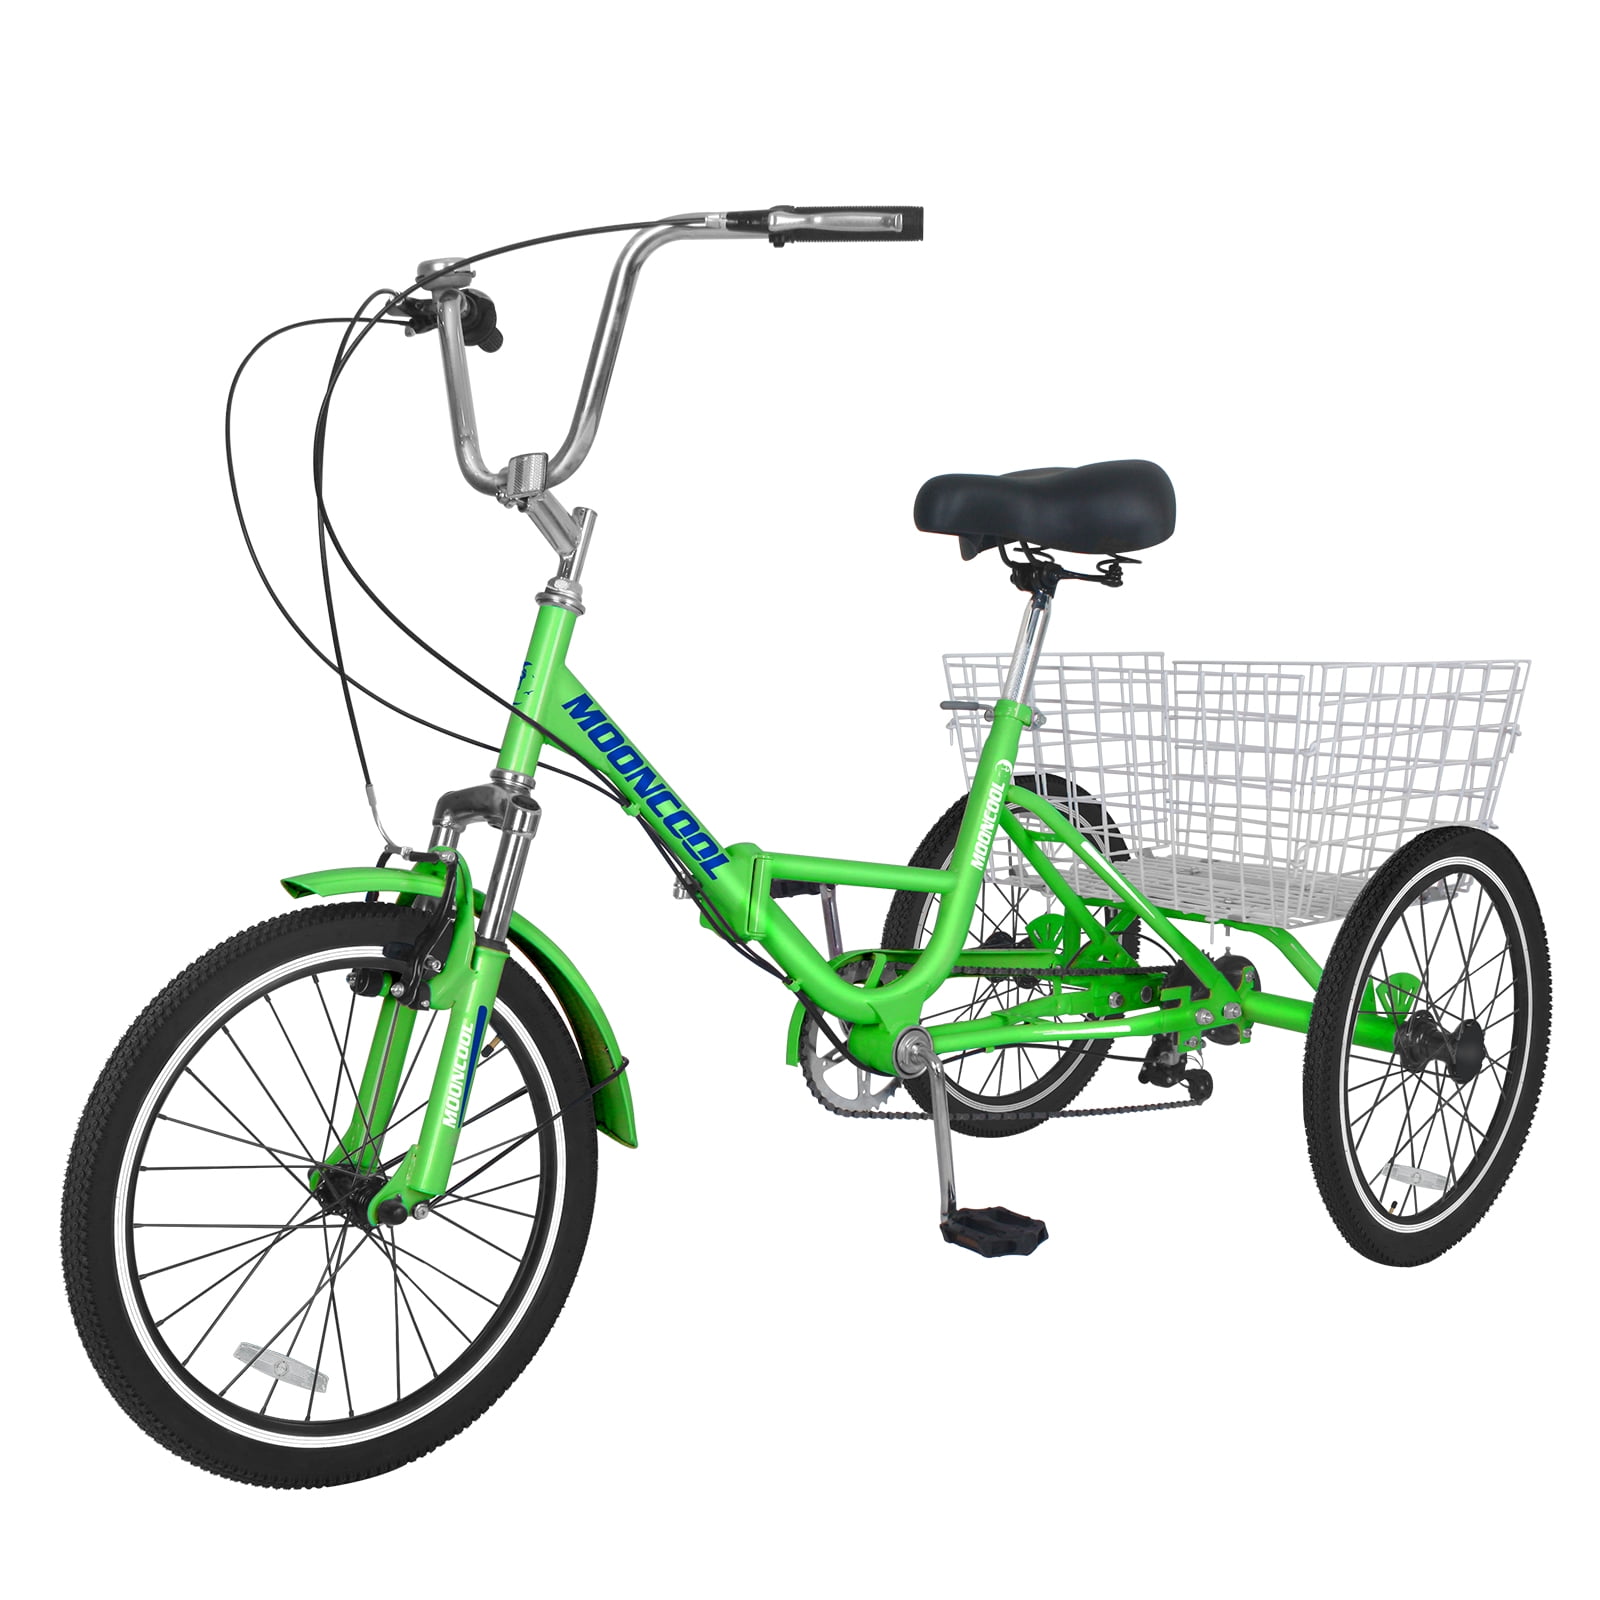 Seniors MOPHOTO Adult Tricycles Three Wheel Cruiser Bike 7 Speed Adult Trikes 24/26 inch Wheels Low Step-Through Three-Wheeled Bicycles with Cargo Basket for Women Men 